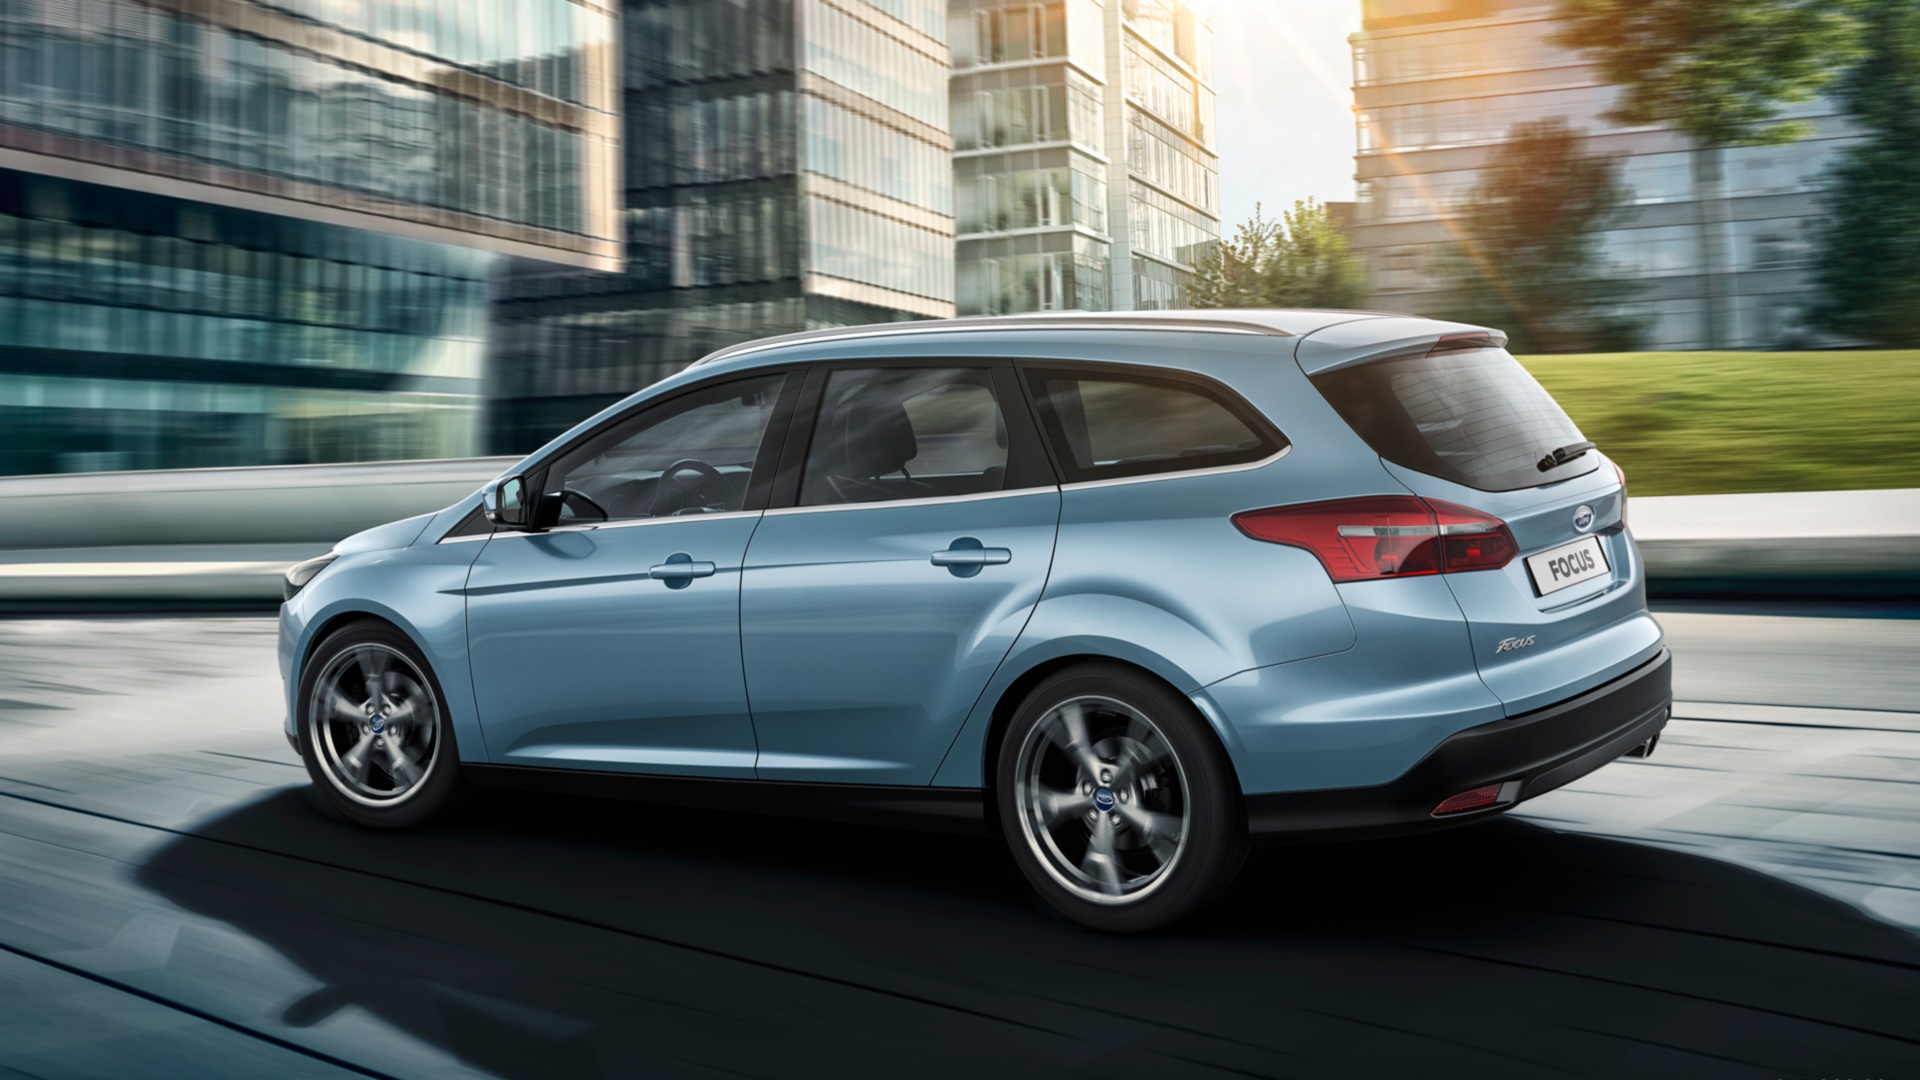 Vehicles 2015 Ford Focus Wagon HD Wallpaper | Background Image